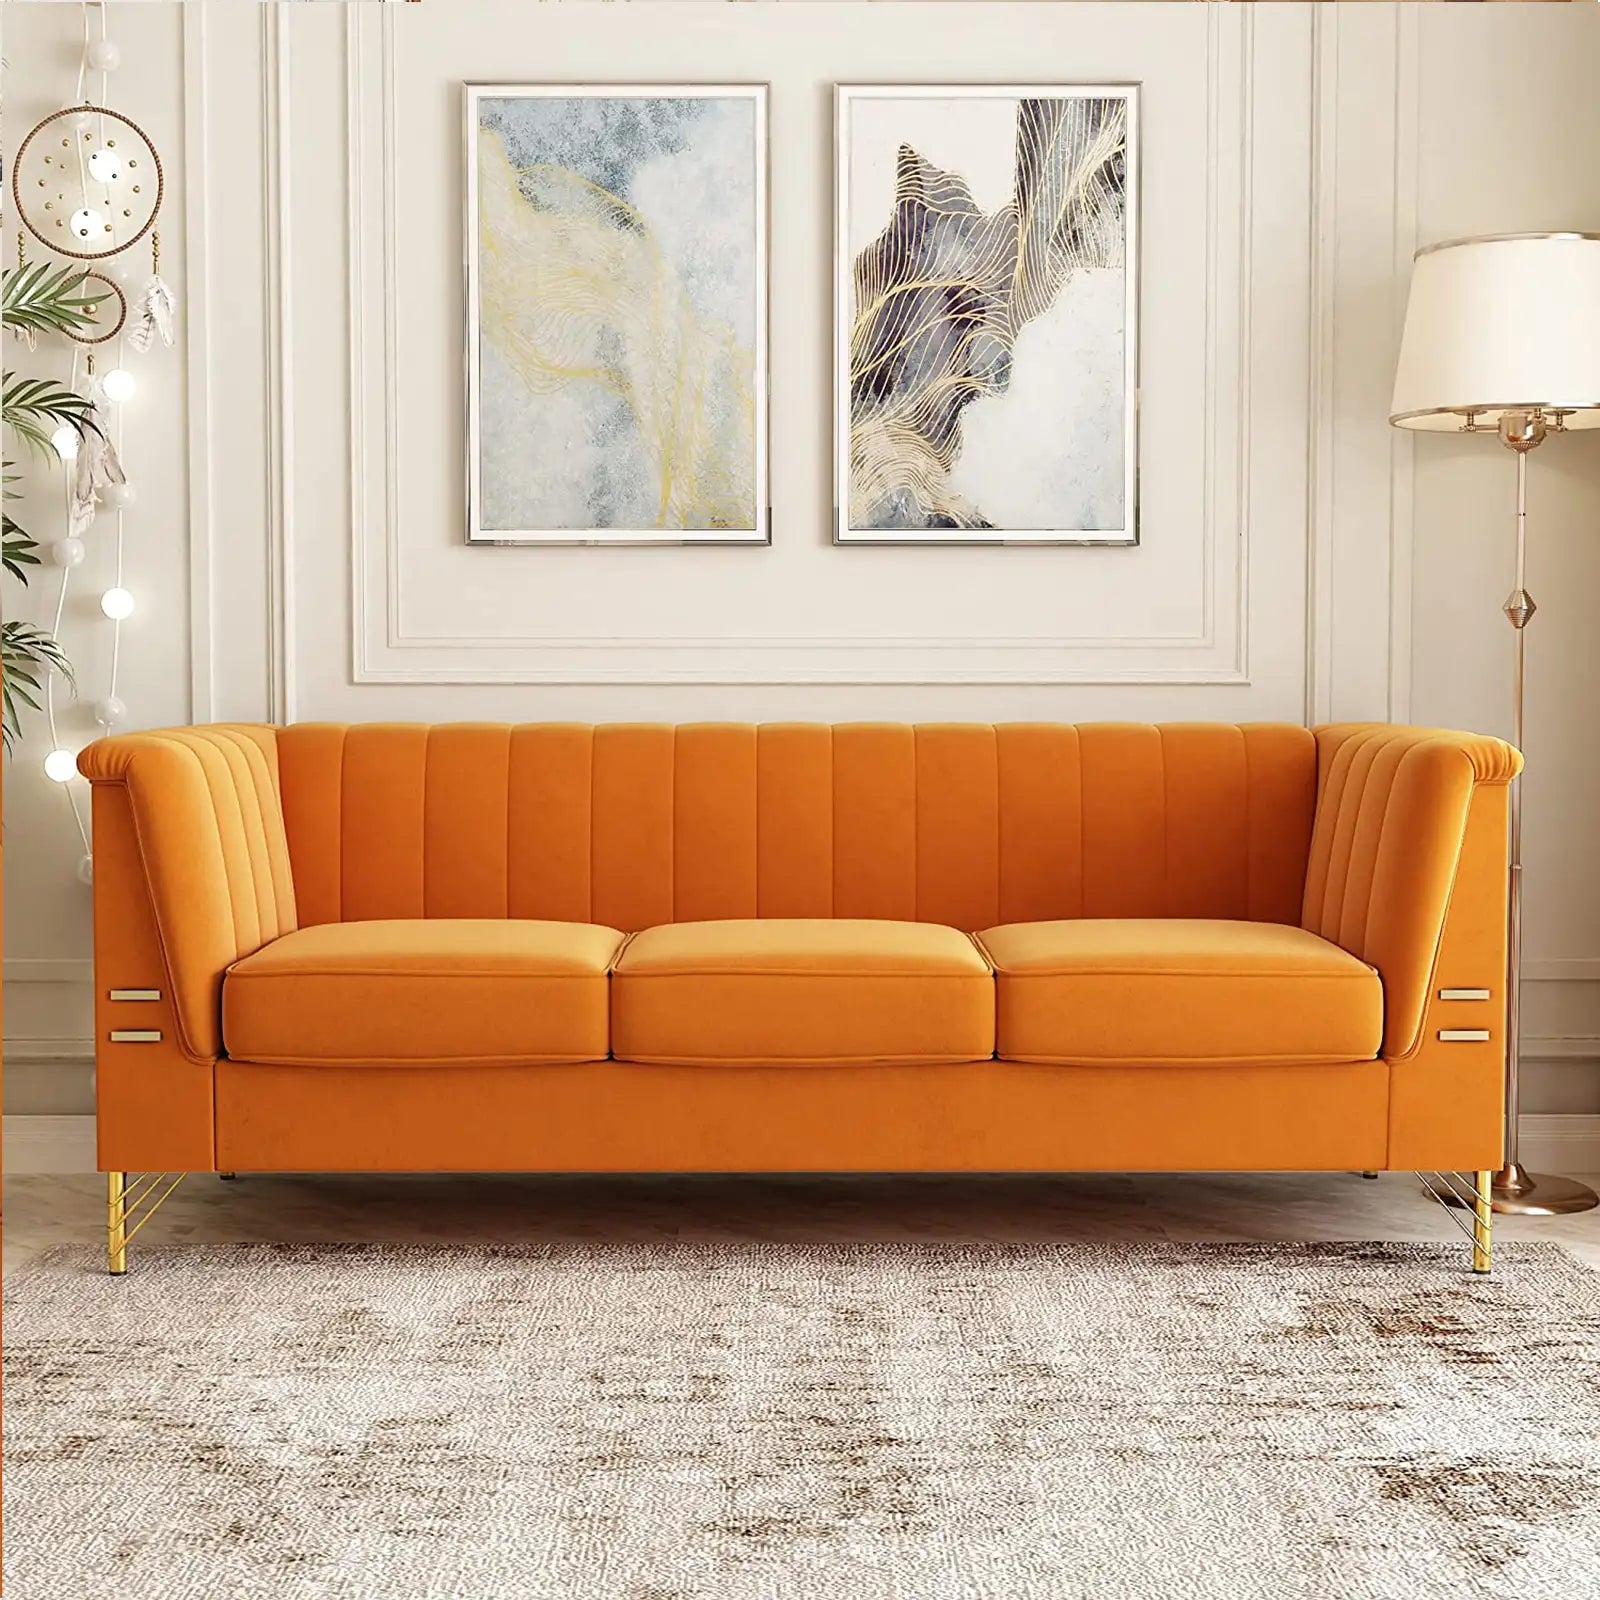 Velvet Sectional Sofa,3-Seater Couch with Soft Seat Metal Legs for Bedroom,Office,Apartment,Living Room